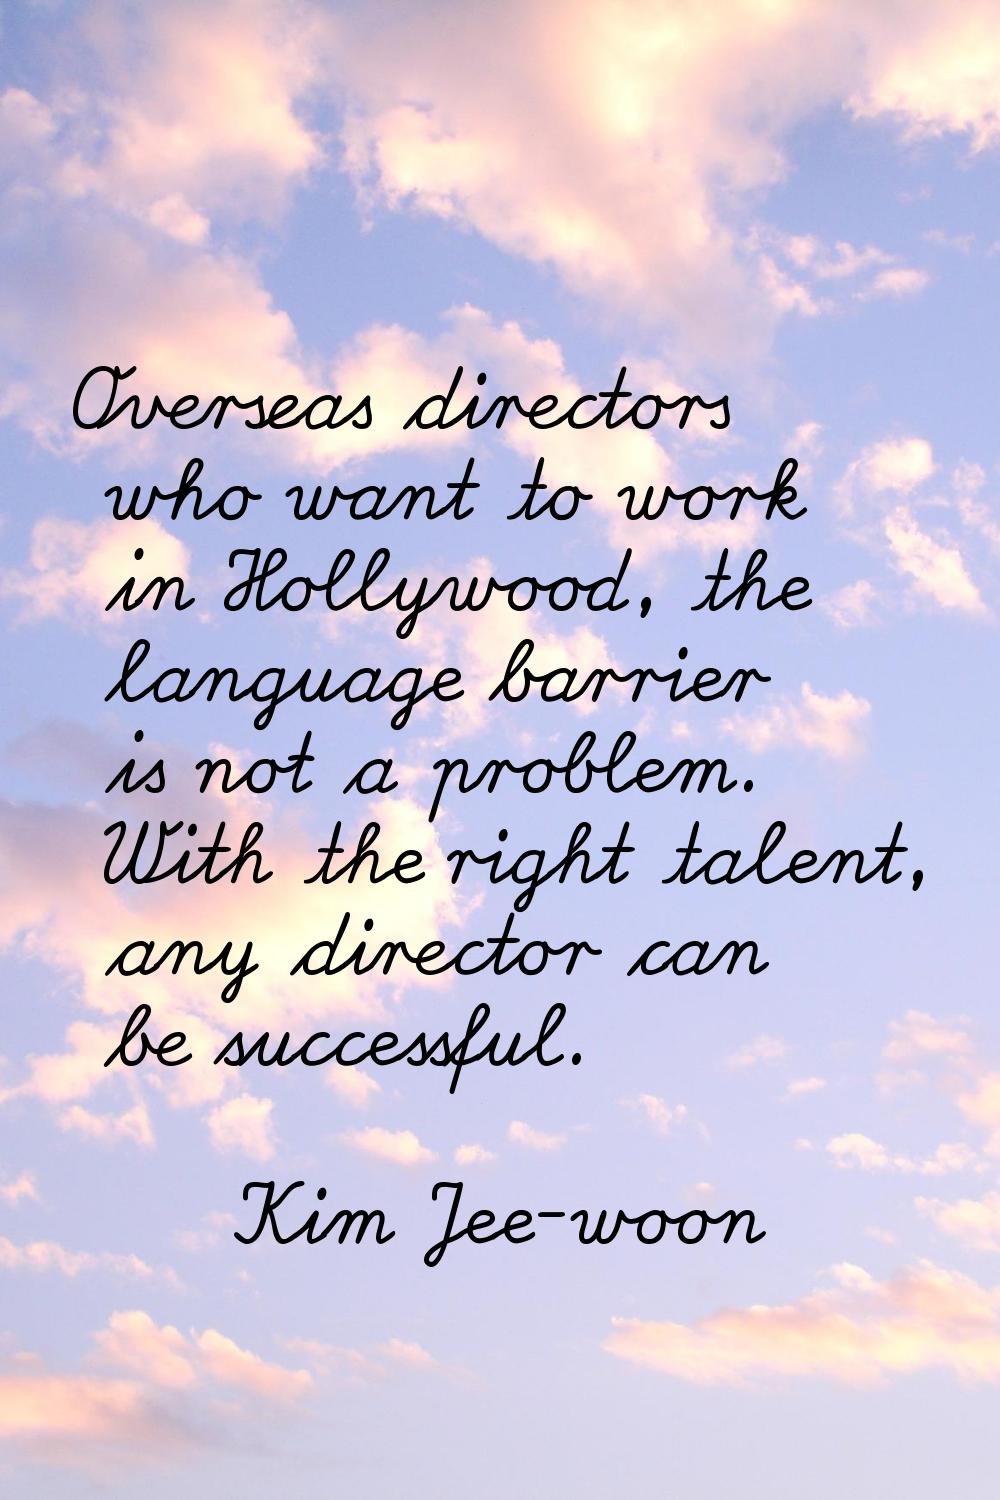 Overseas directors who want to work in Hollywood, the language barrier is not a problem. With the r